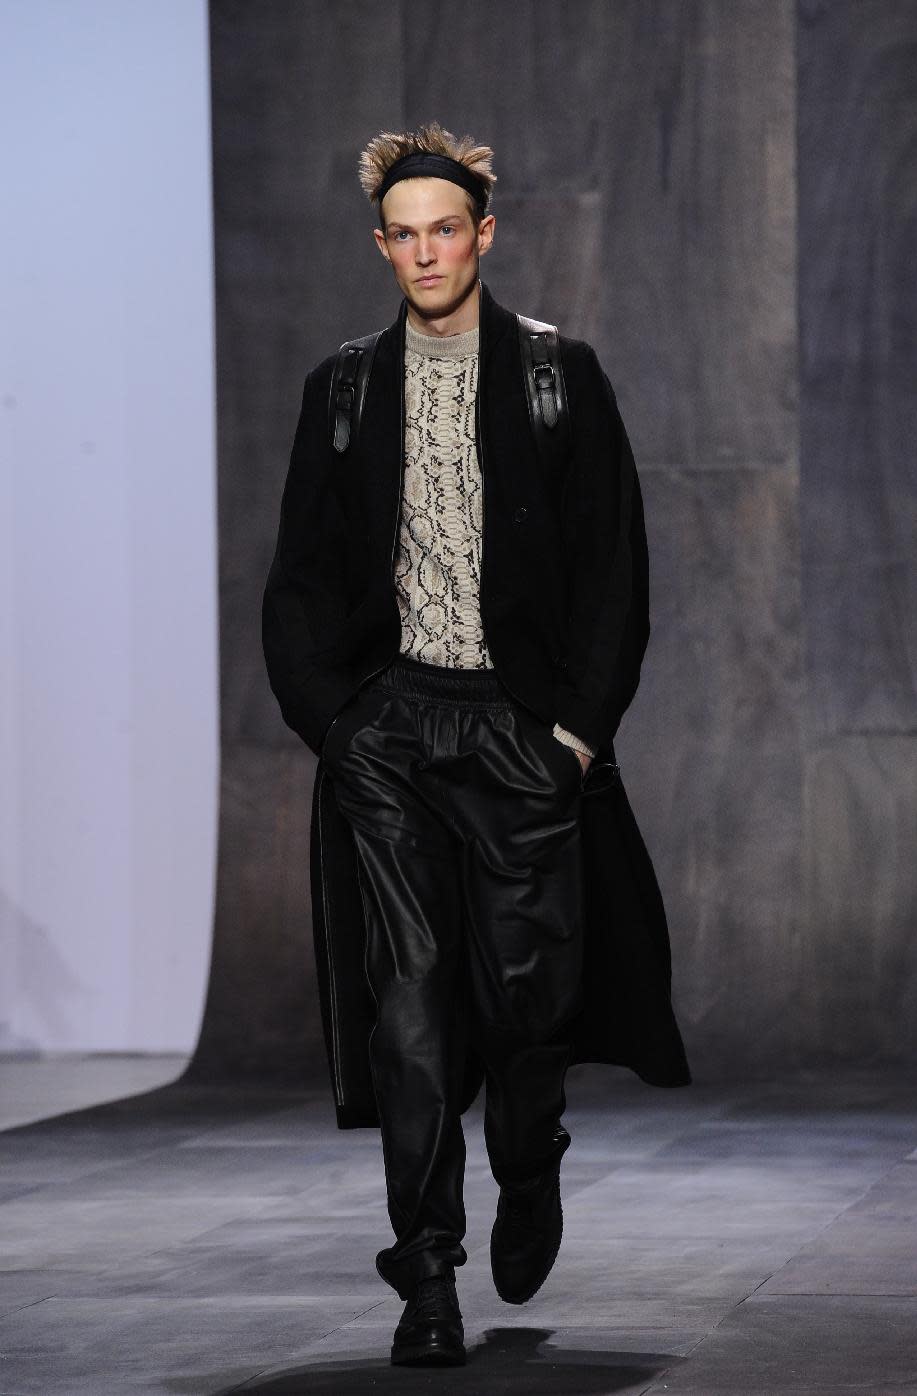 A model wears a creation by fashion designer Damir Doma as part of his fall-winter 2013/2014 men's fashion collection, in Paris, Saturday, Jan. 19, 2013. (AP Photo/Zacharie Scheurer)